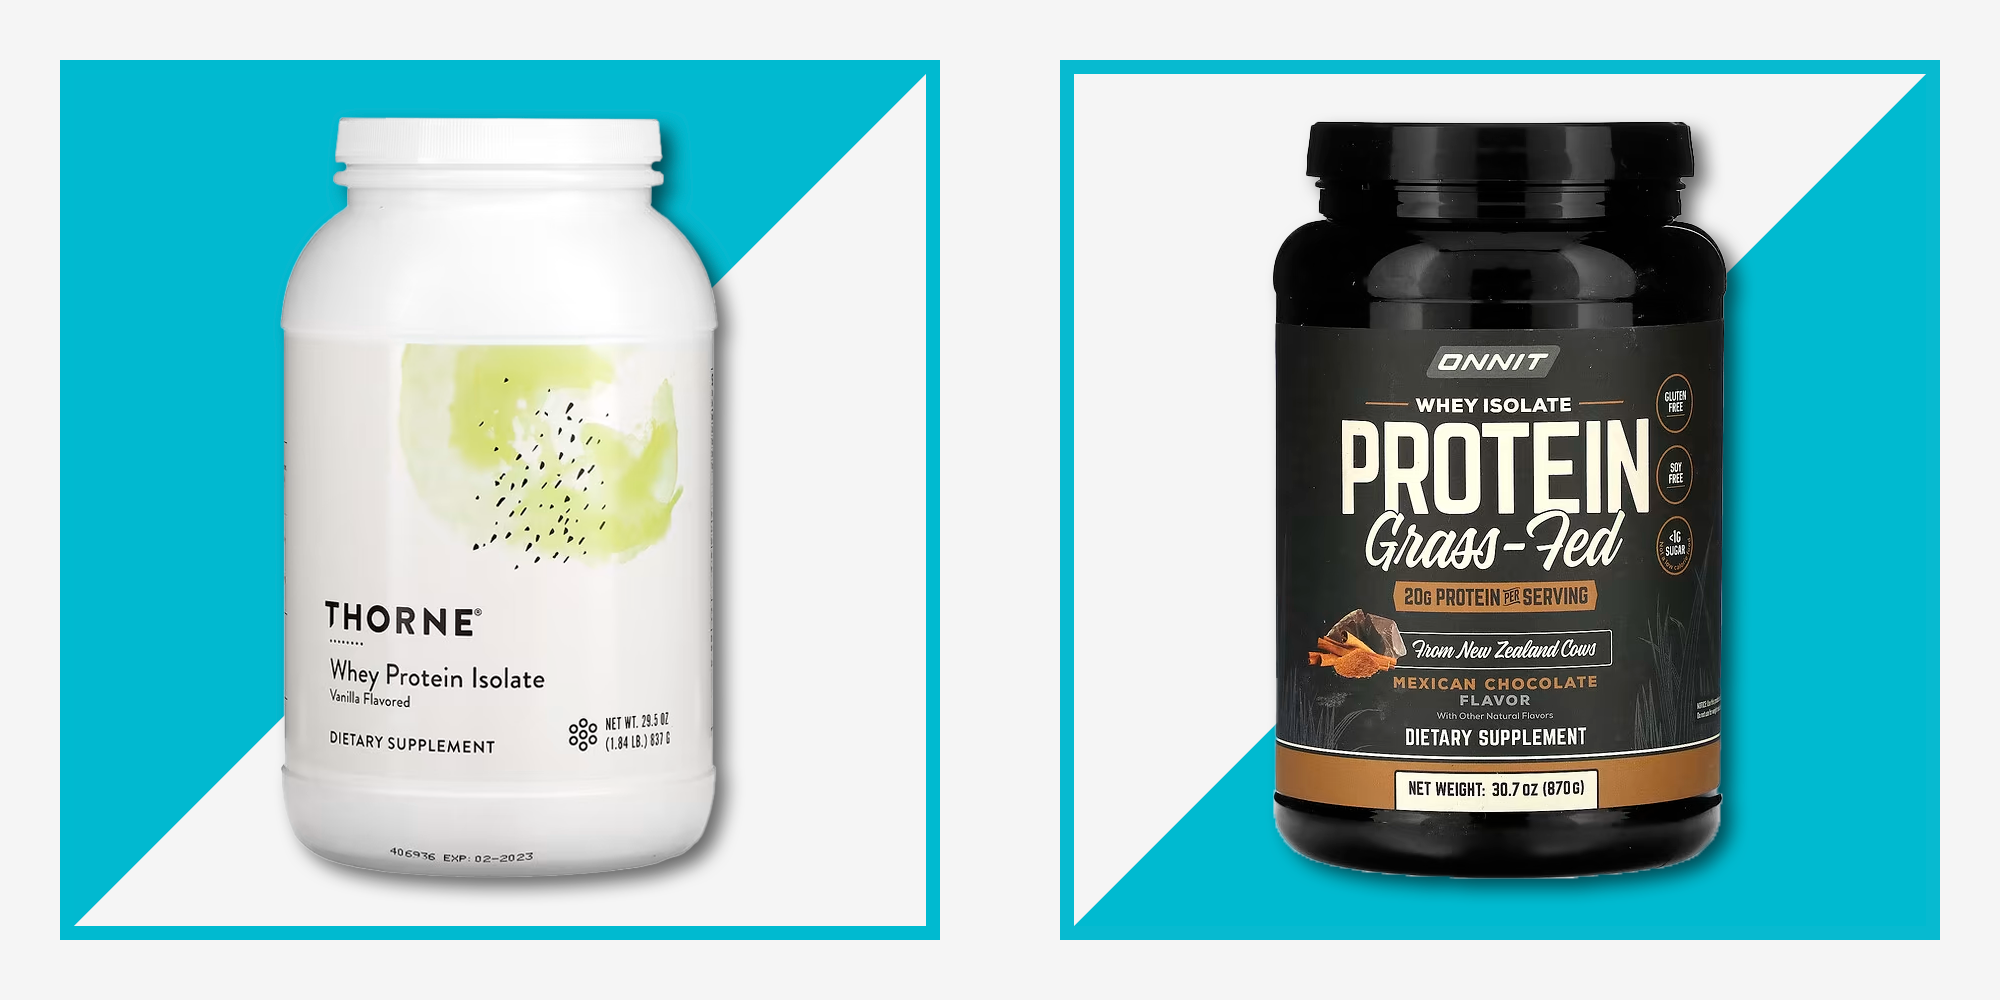 9 Best Whey Protein Powders 2023, According to Experts - Whey For Muscle